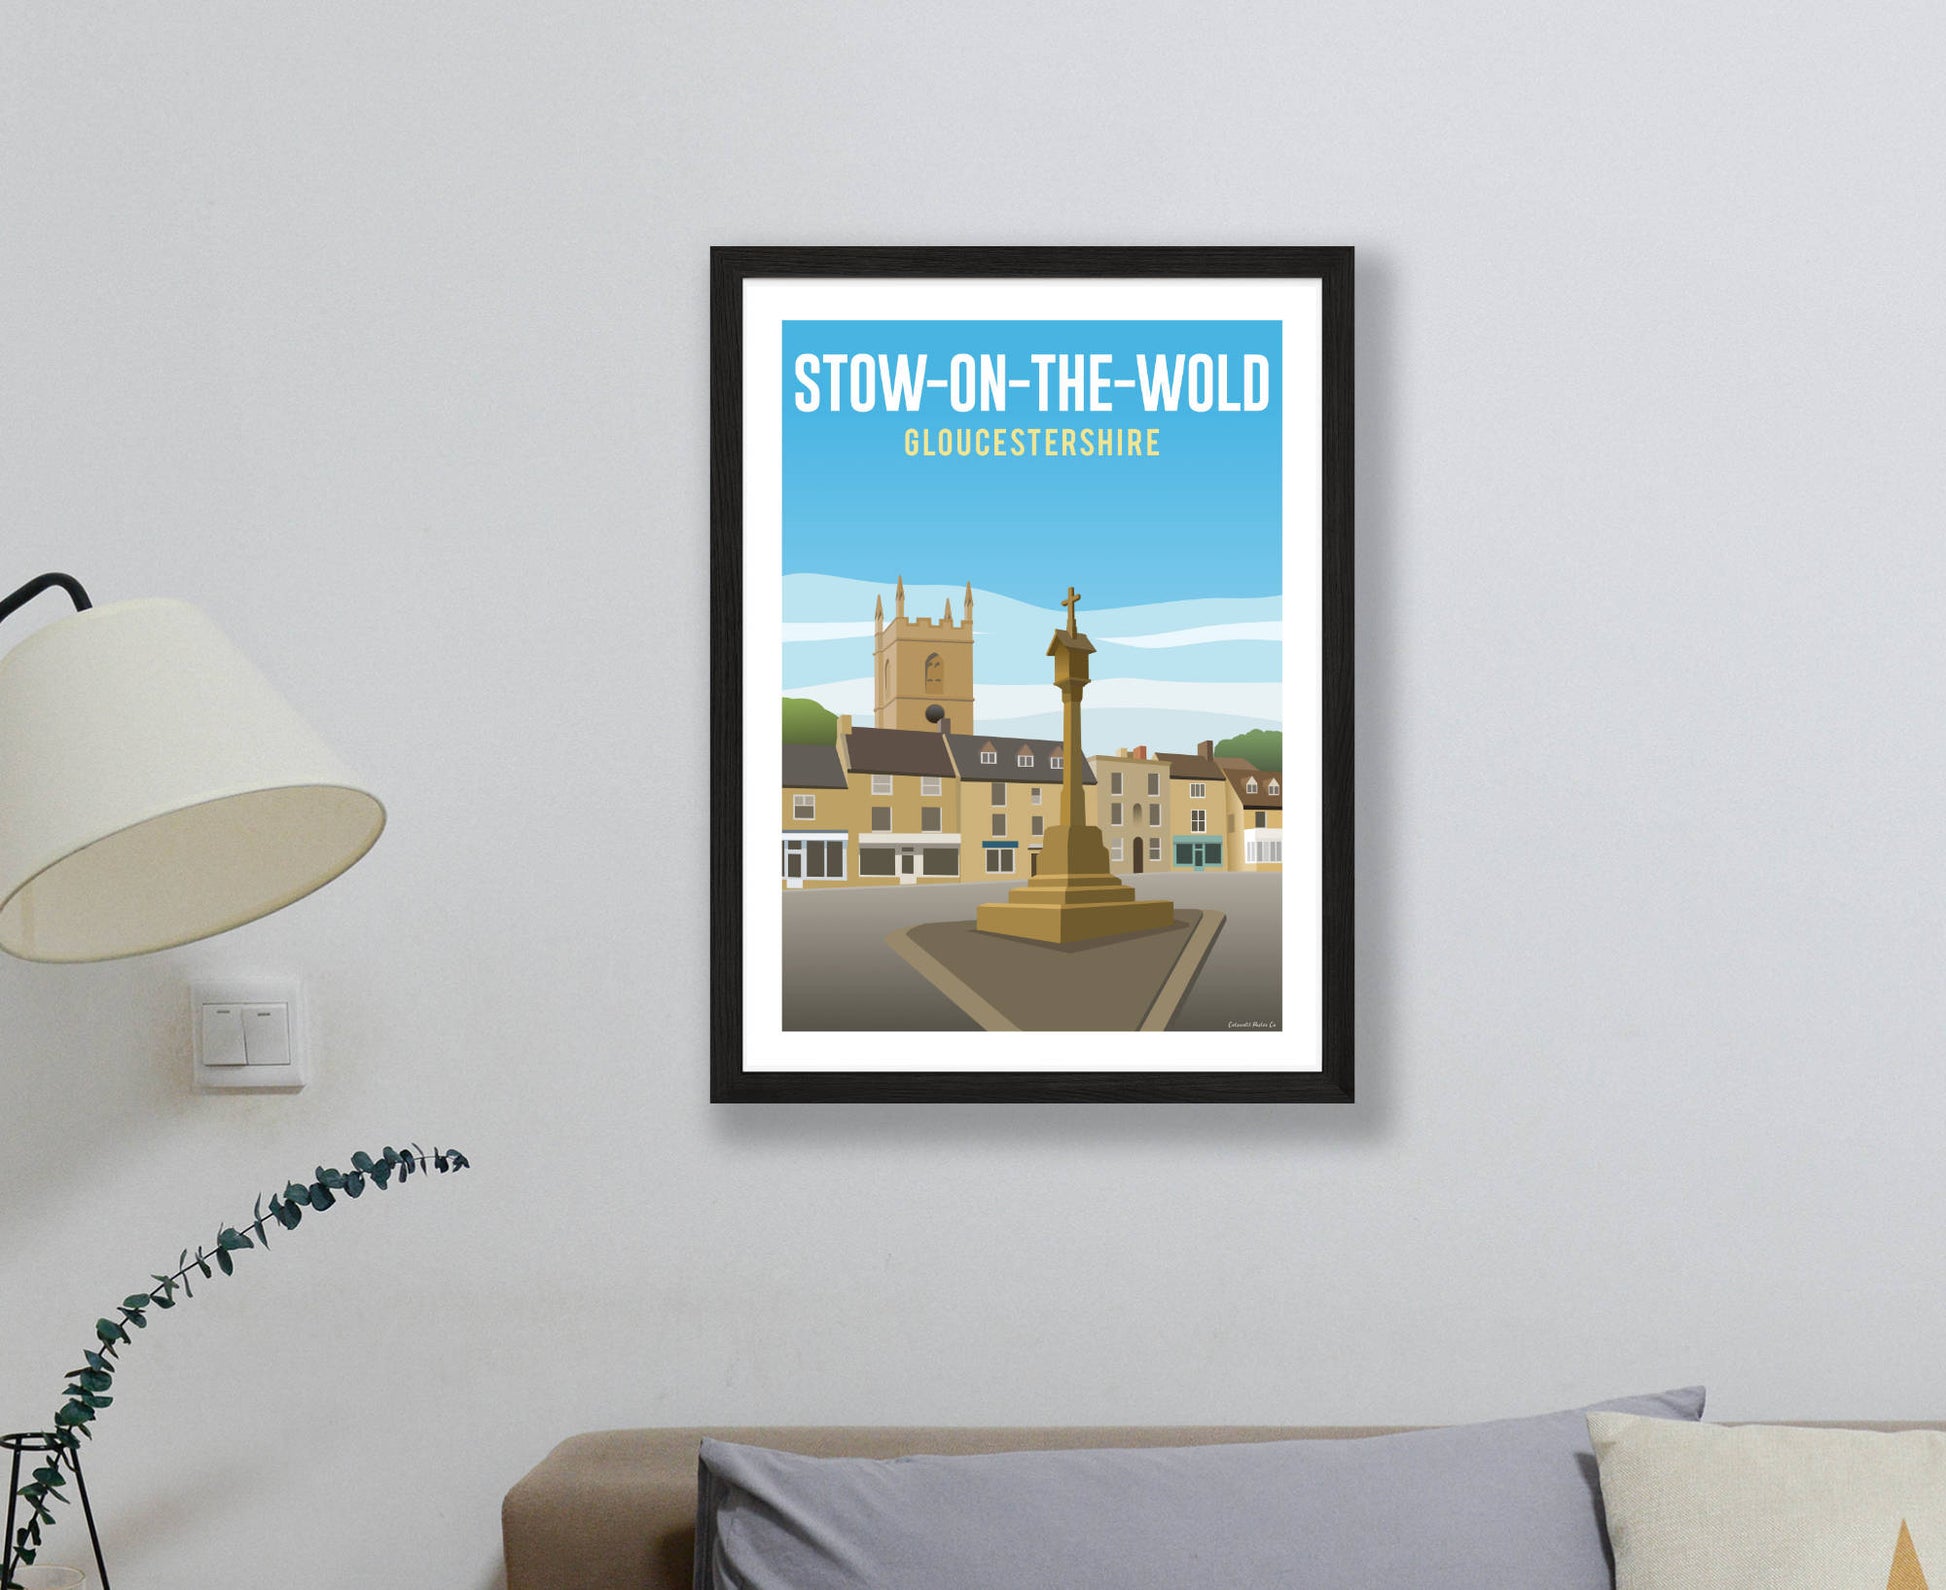 Stow-on-the-Wold Poster in black frame